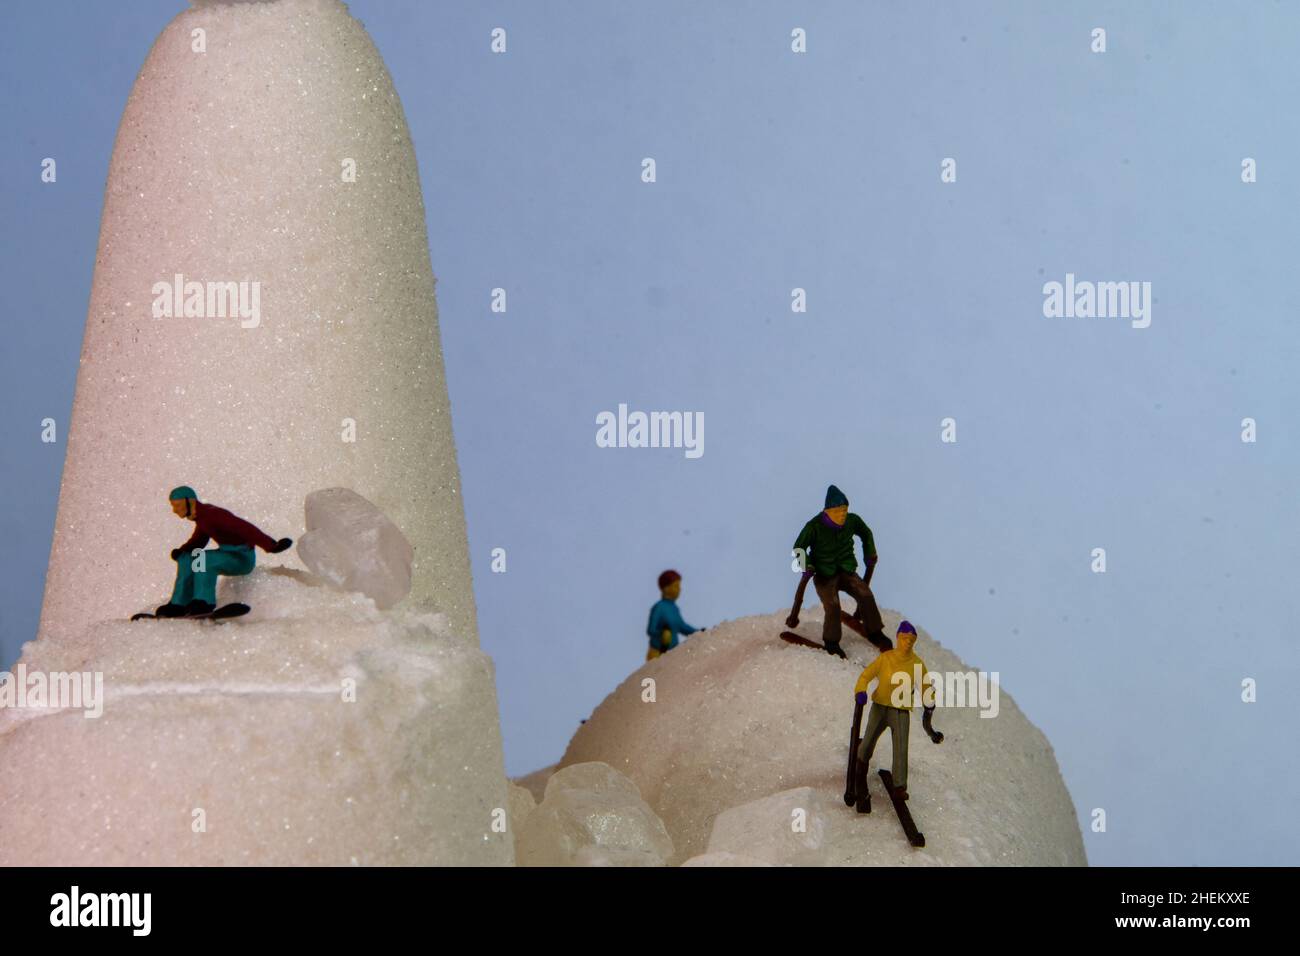 skiing and snowboarding on a mountain made from sugar still life Stock Photo